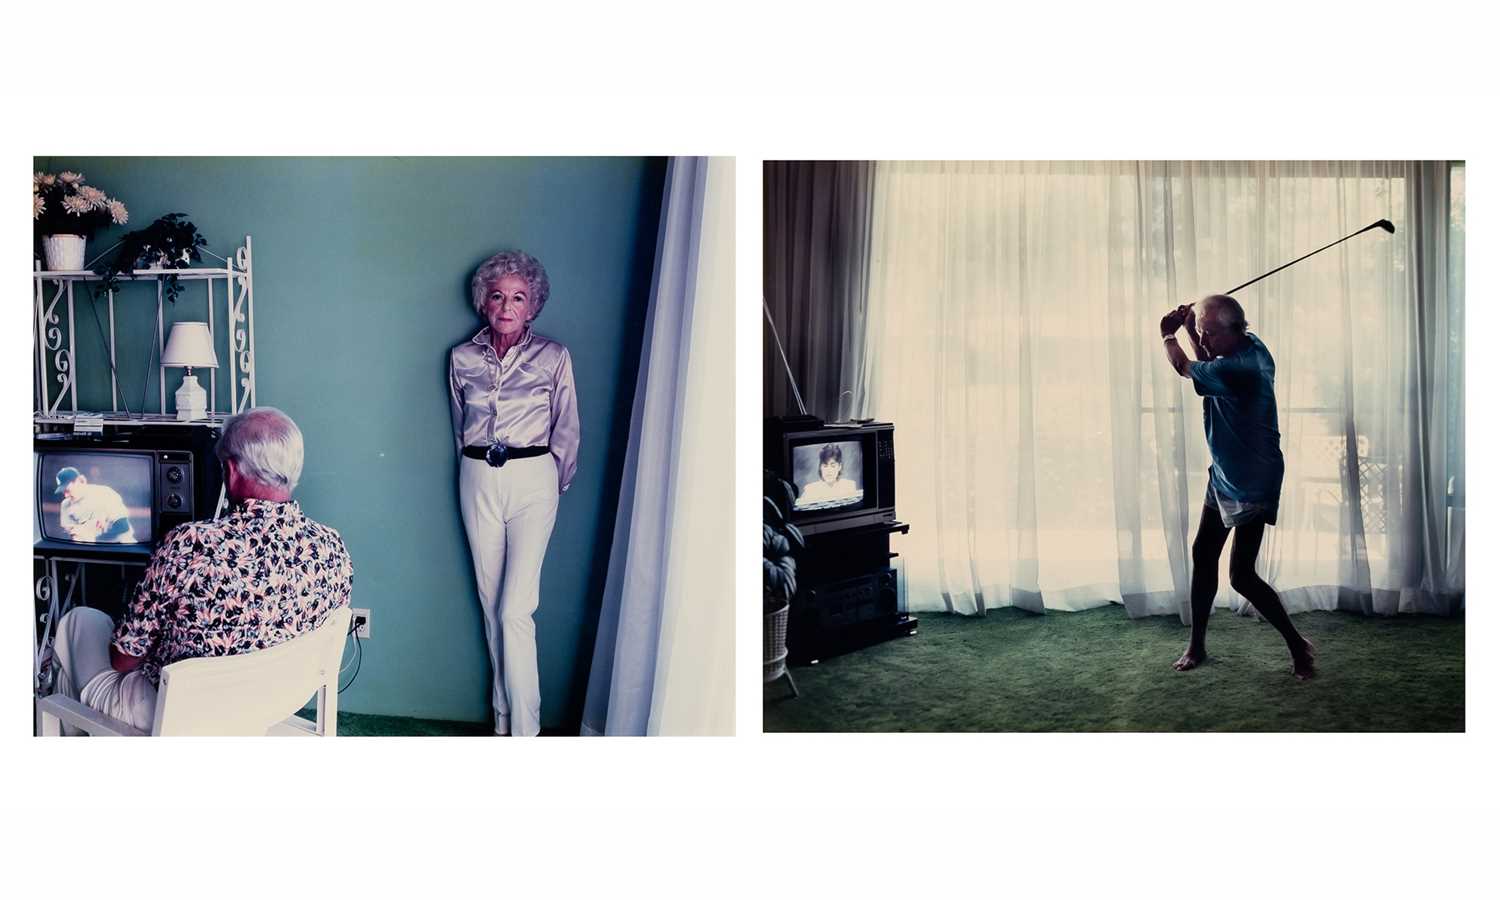 Lot 698 - Larry Sultan: Two works from the series ”Pictures from Home”, 1986